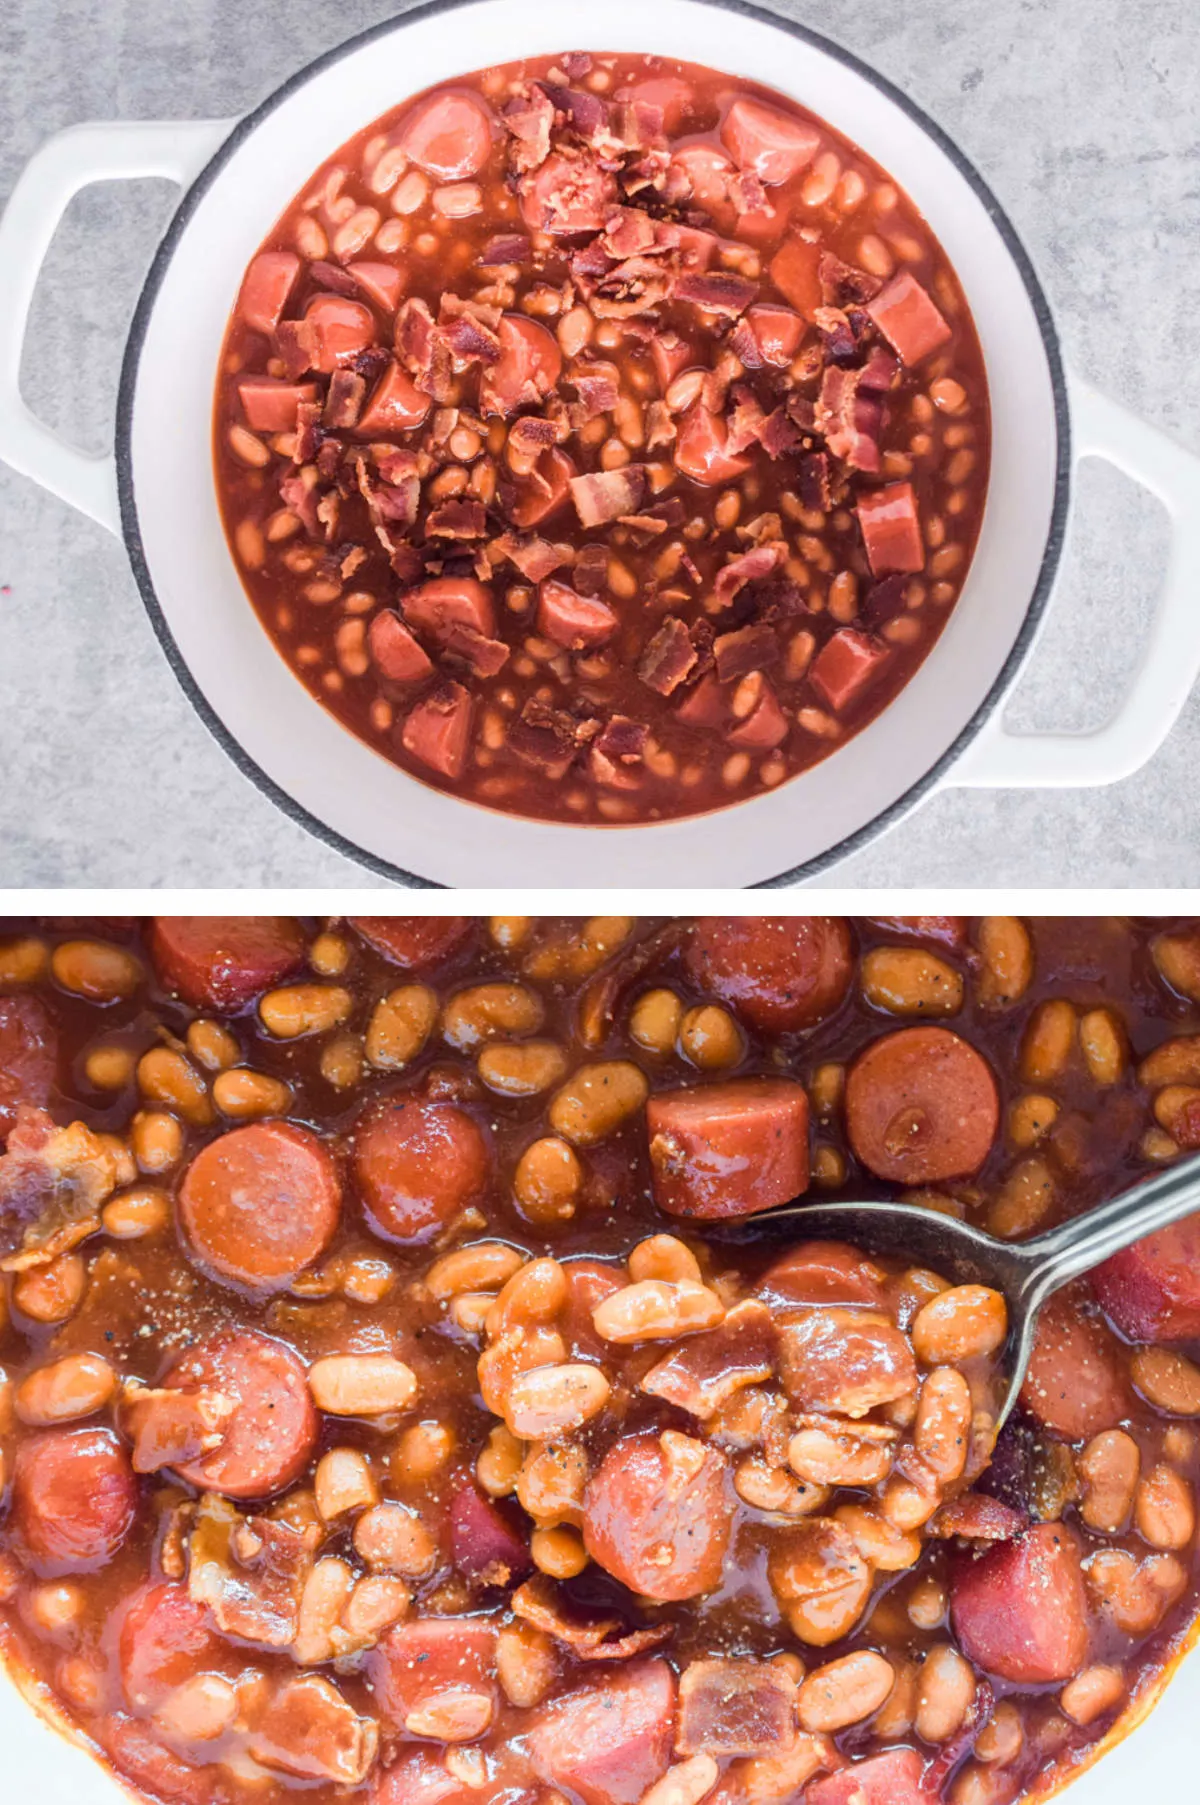 Two overhead images in one: 1. Chopped bacon is added to the pot. 2. Closeup of finished recipe, spoon scooping beans and franks recipe. 